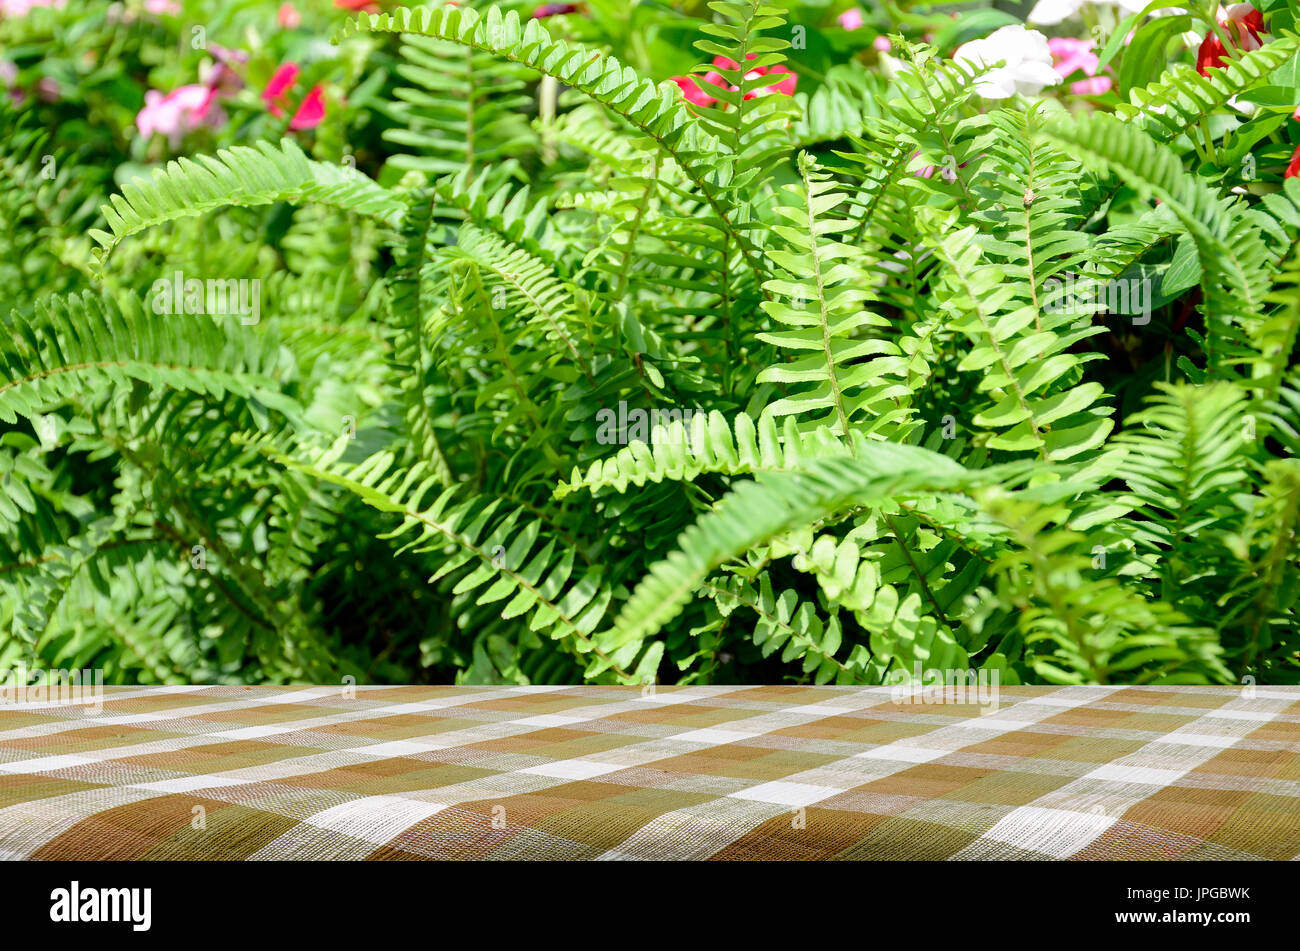 Picnic table with green garden background of Fishbone Fern or Sword Fern (Nephrolepis cordifolia (L.) Presl.) Stock Photo